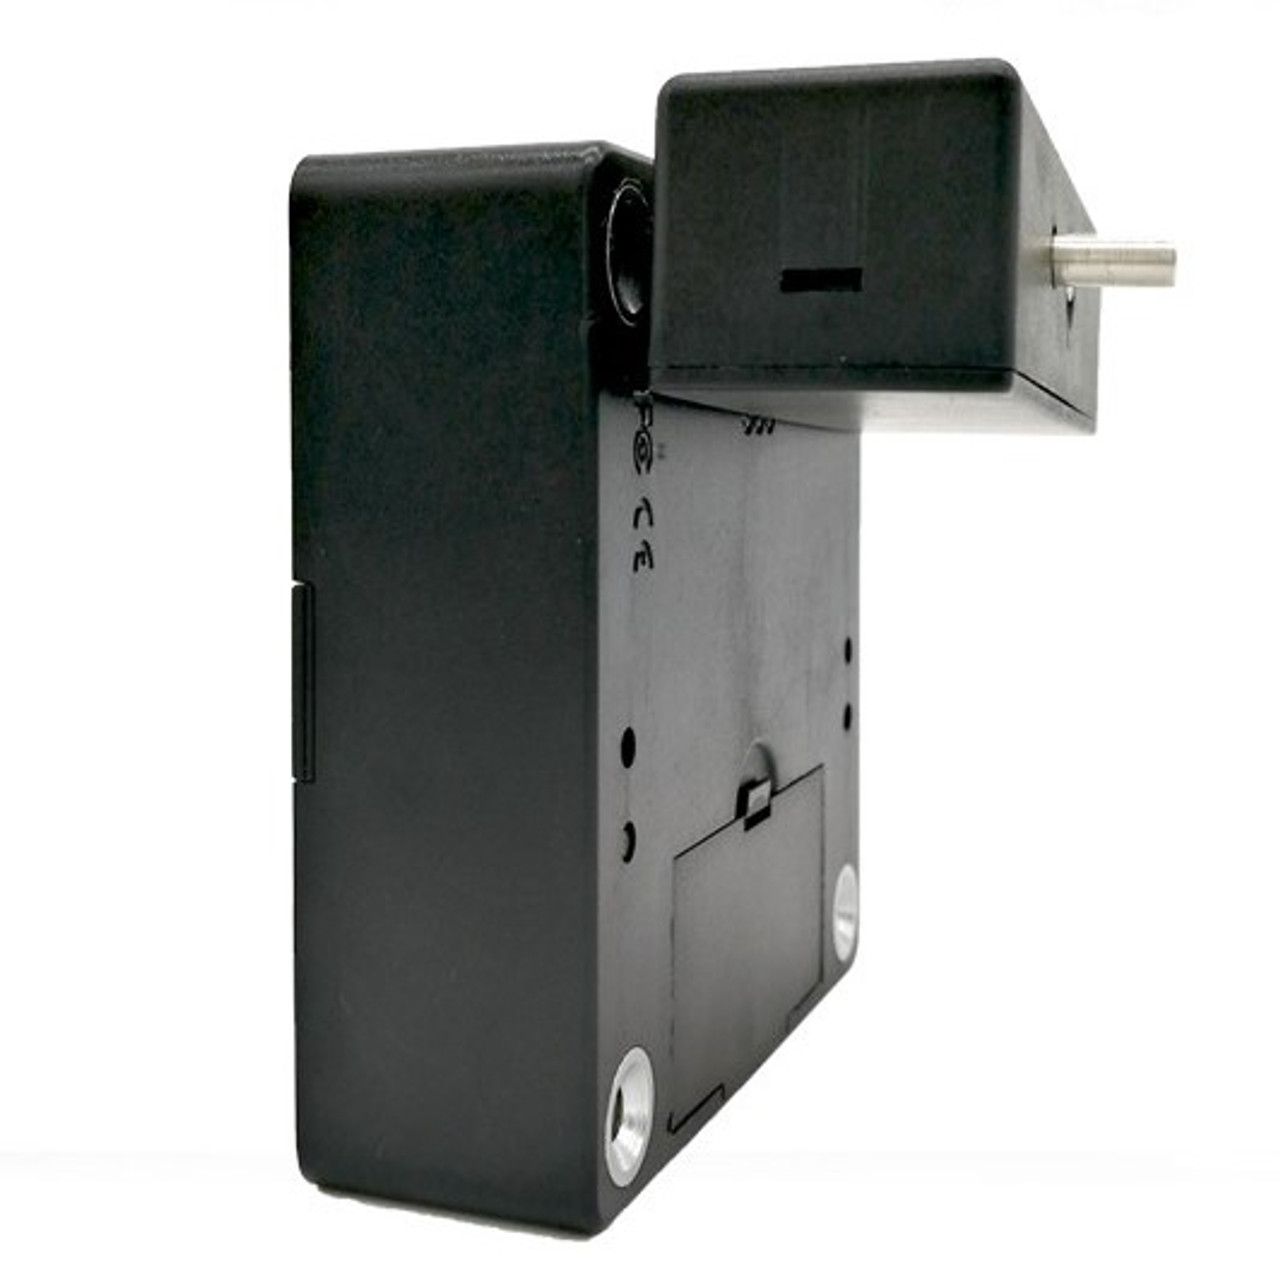 RFID Hidden Cabinet Multiple Lock System with Power Jack option